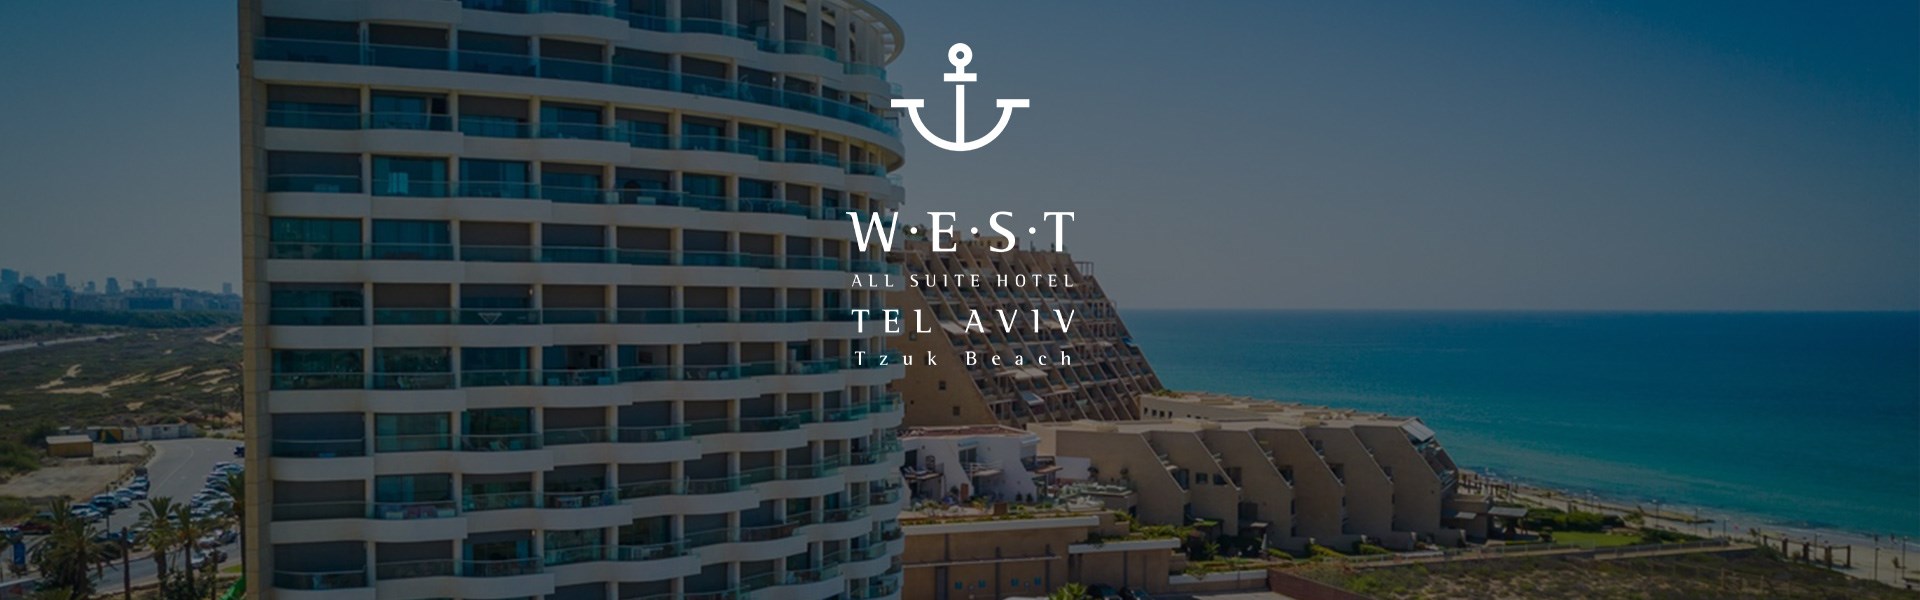 Business hotel in Tel Aviv - West All Suite Hotel 